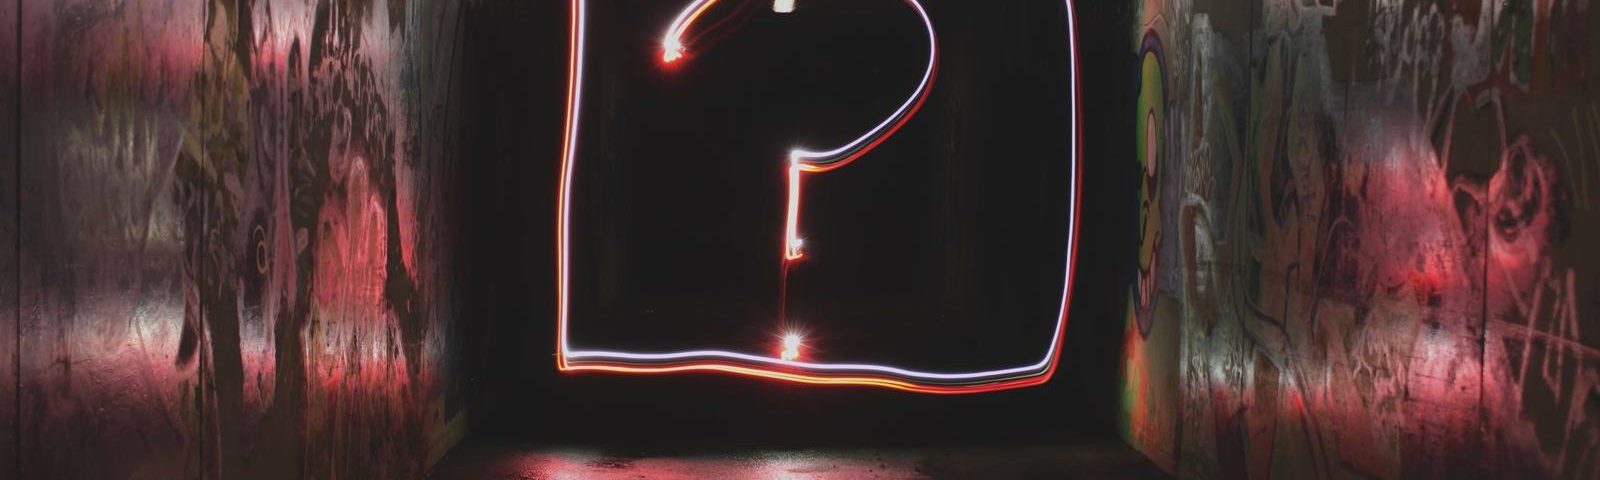 Question Mark Neon Signage CT36NSXvx4wh 1600